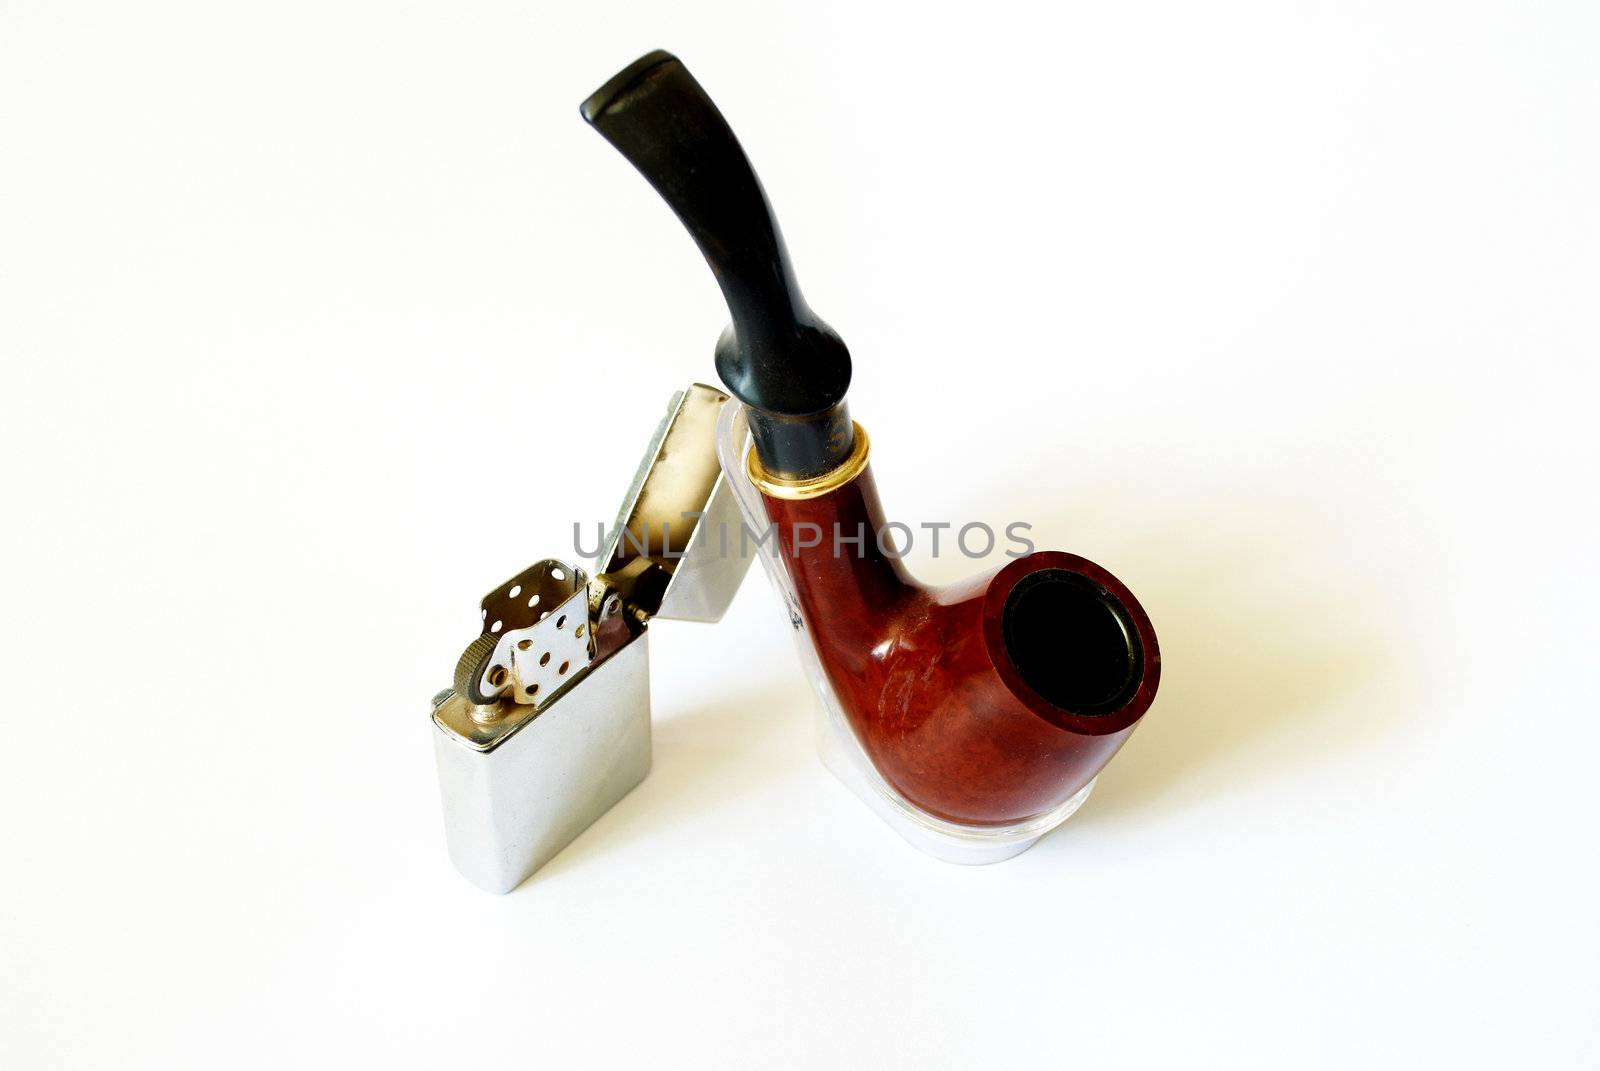 tobacco pipe and petrol lighter with a white background